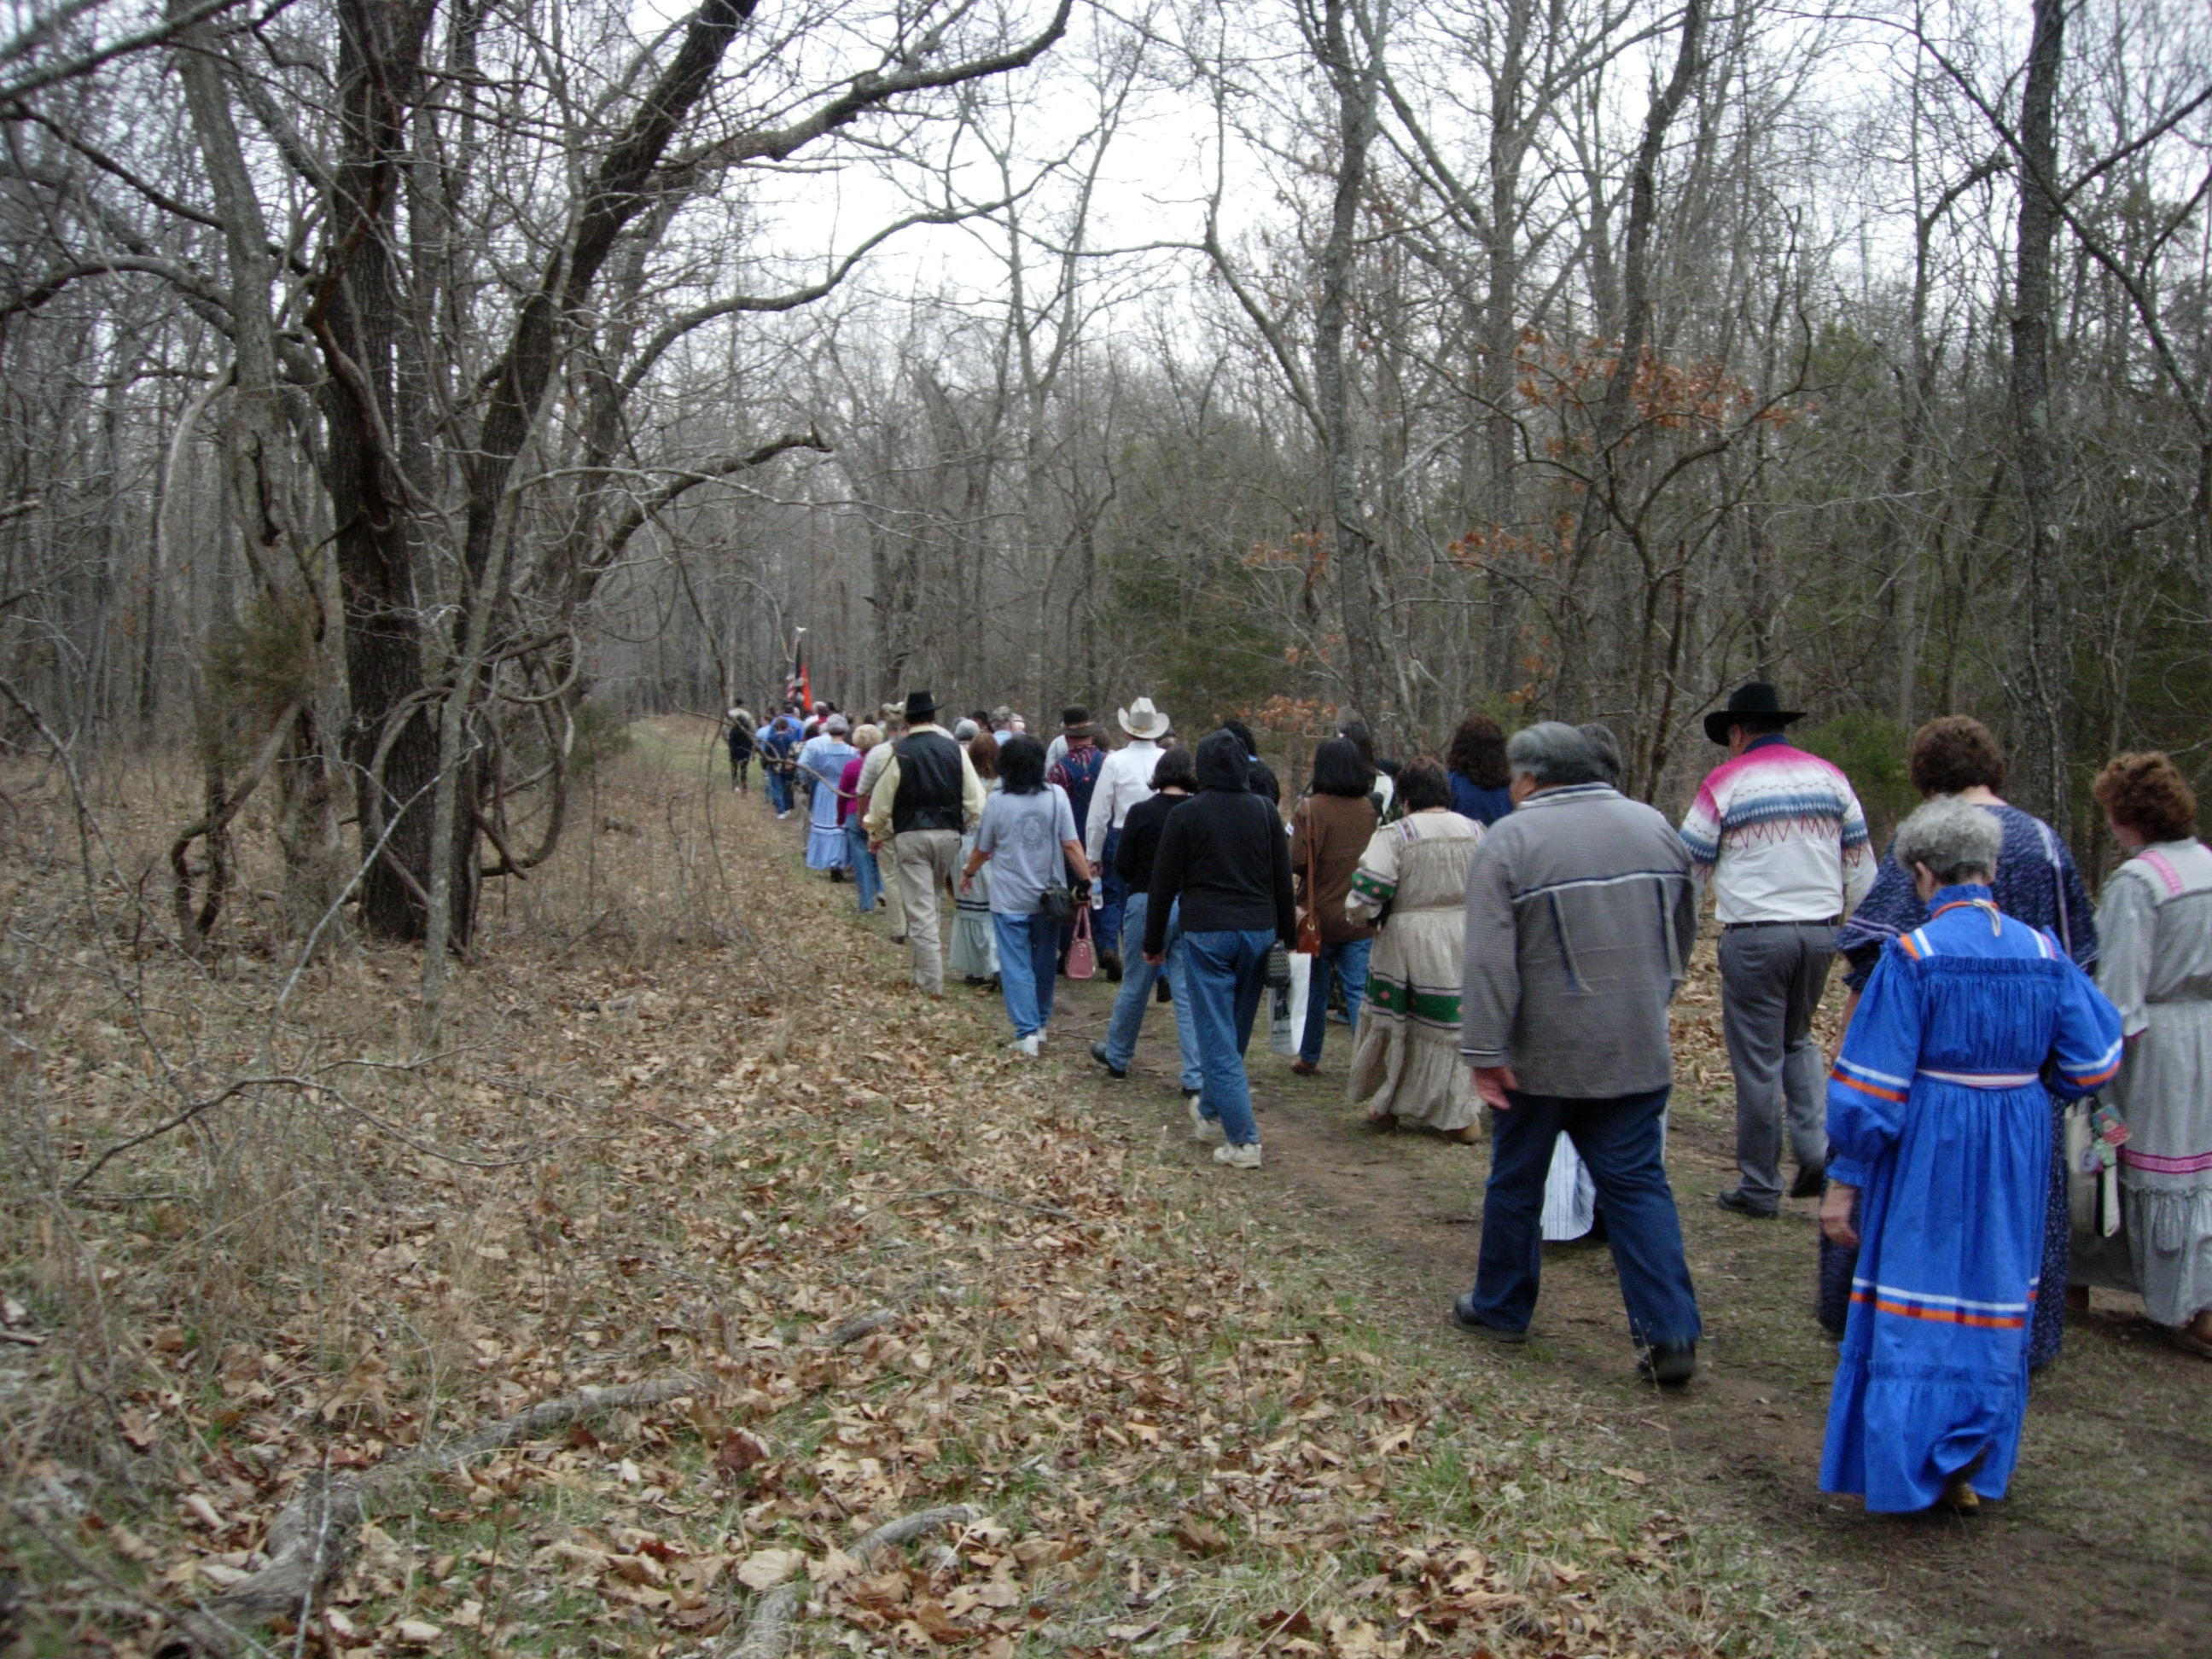 dozens of people walk a section of the Trail of Tears, winter scene, trees with no leaves